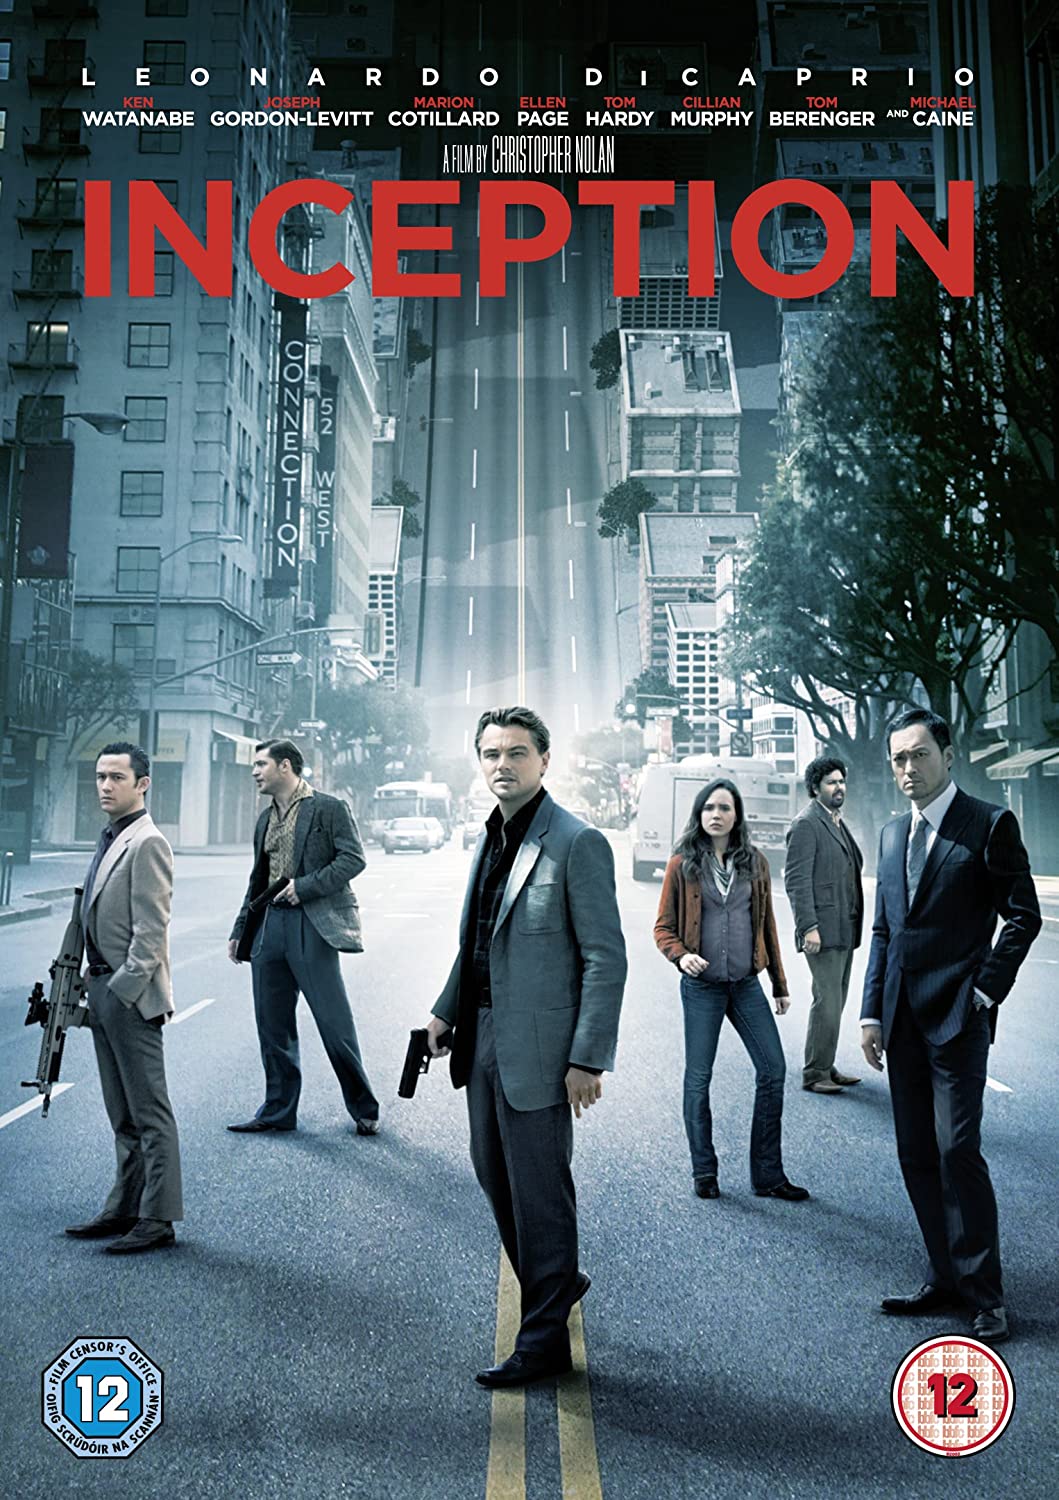 Inception – Action/Science-Fiction [DVD]